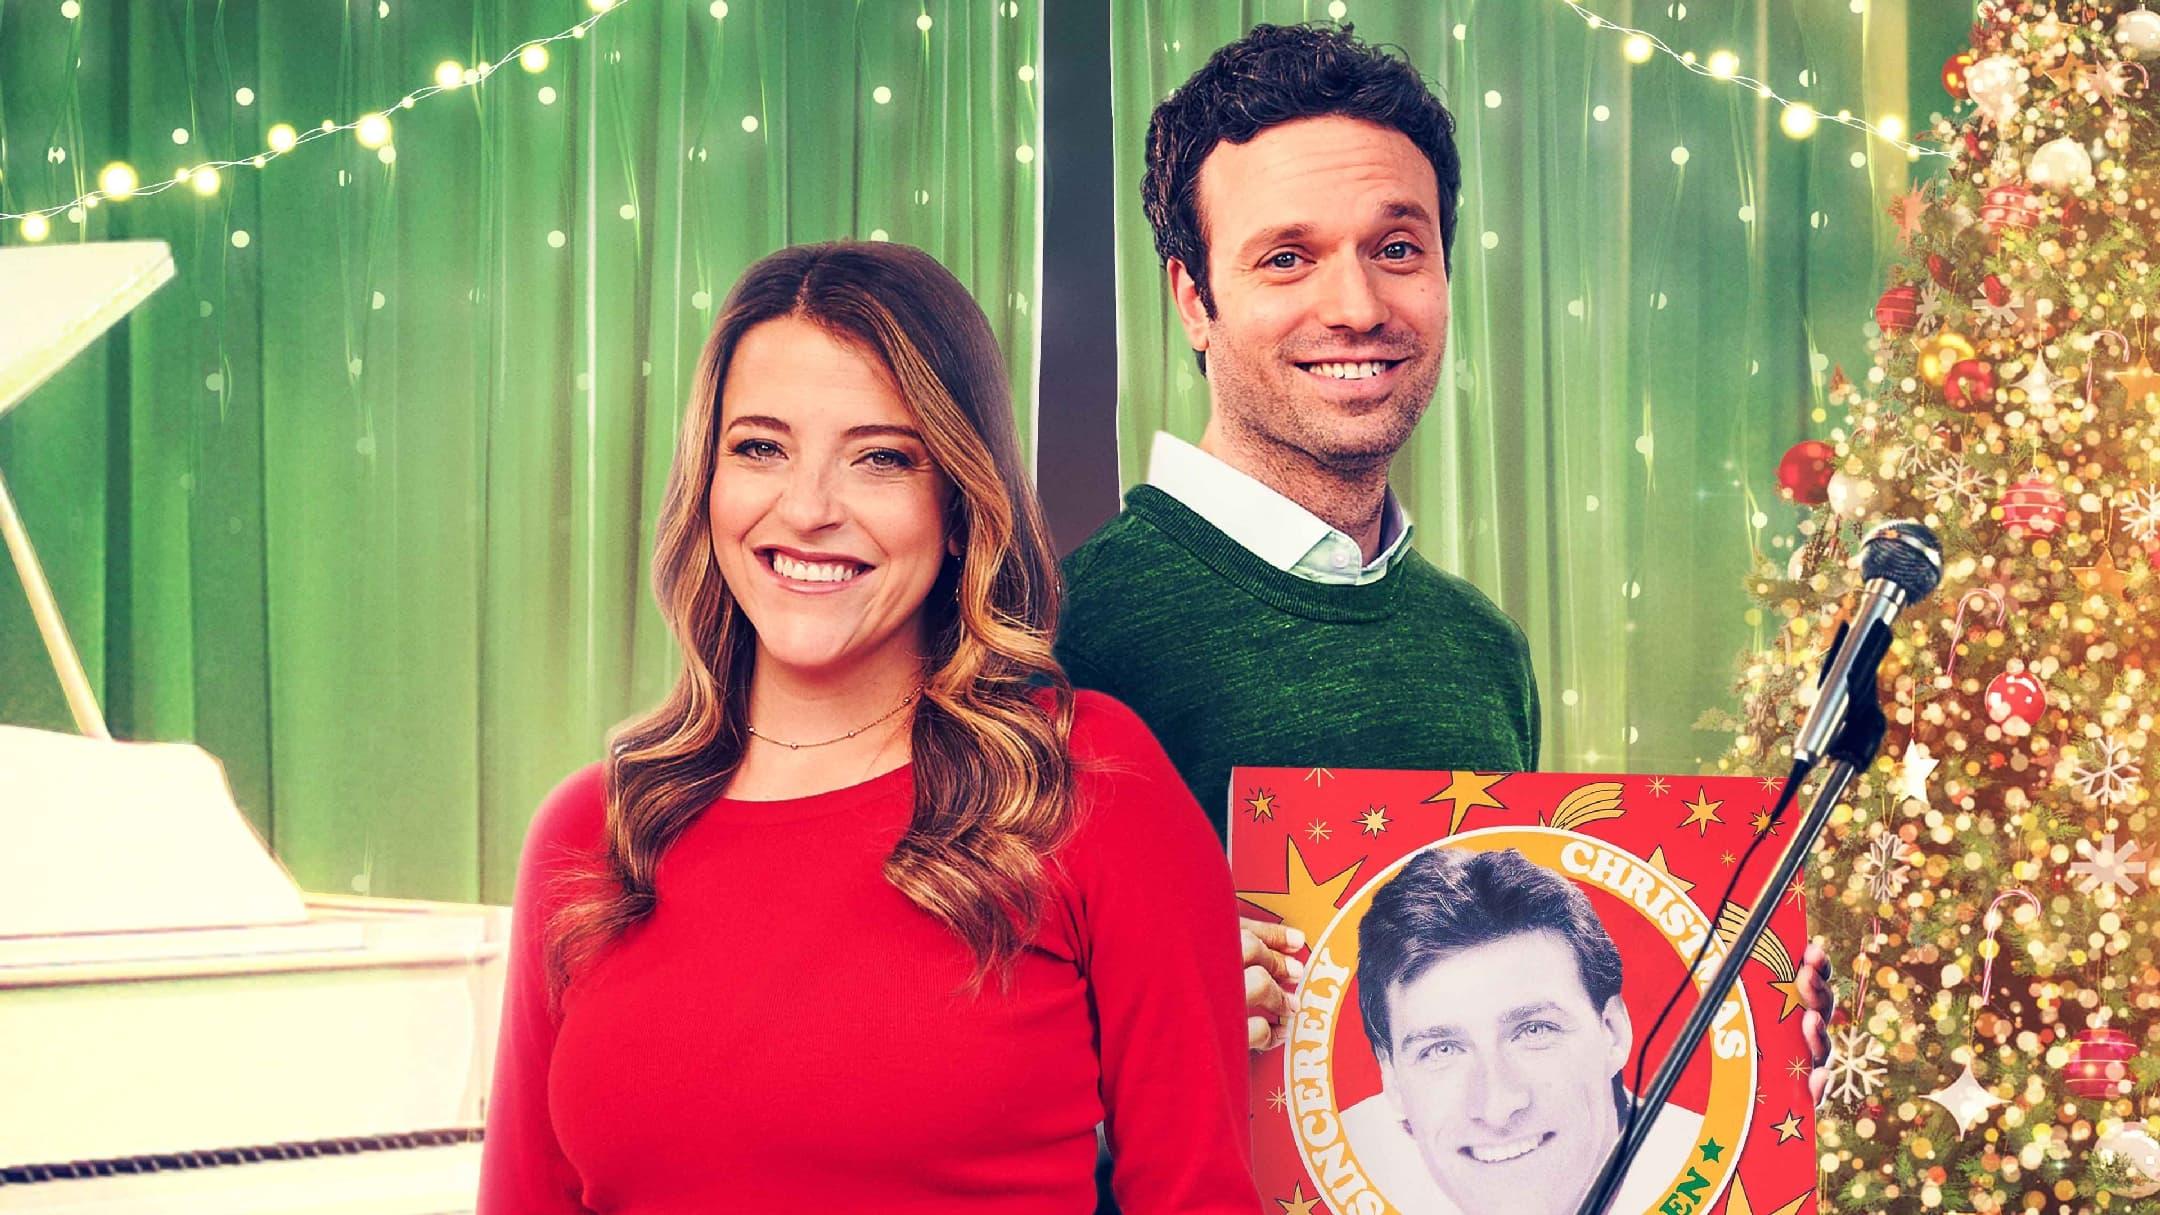 Sincerely Truly Christmas backdrop